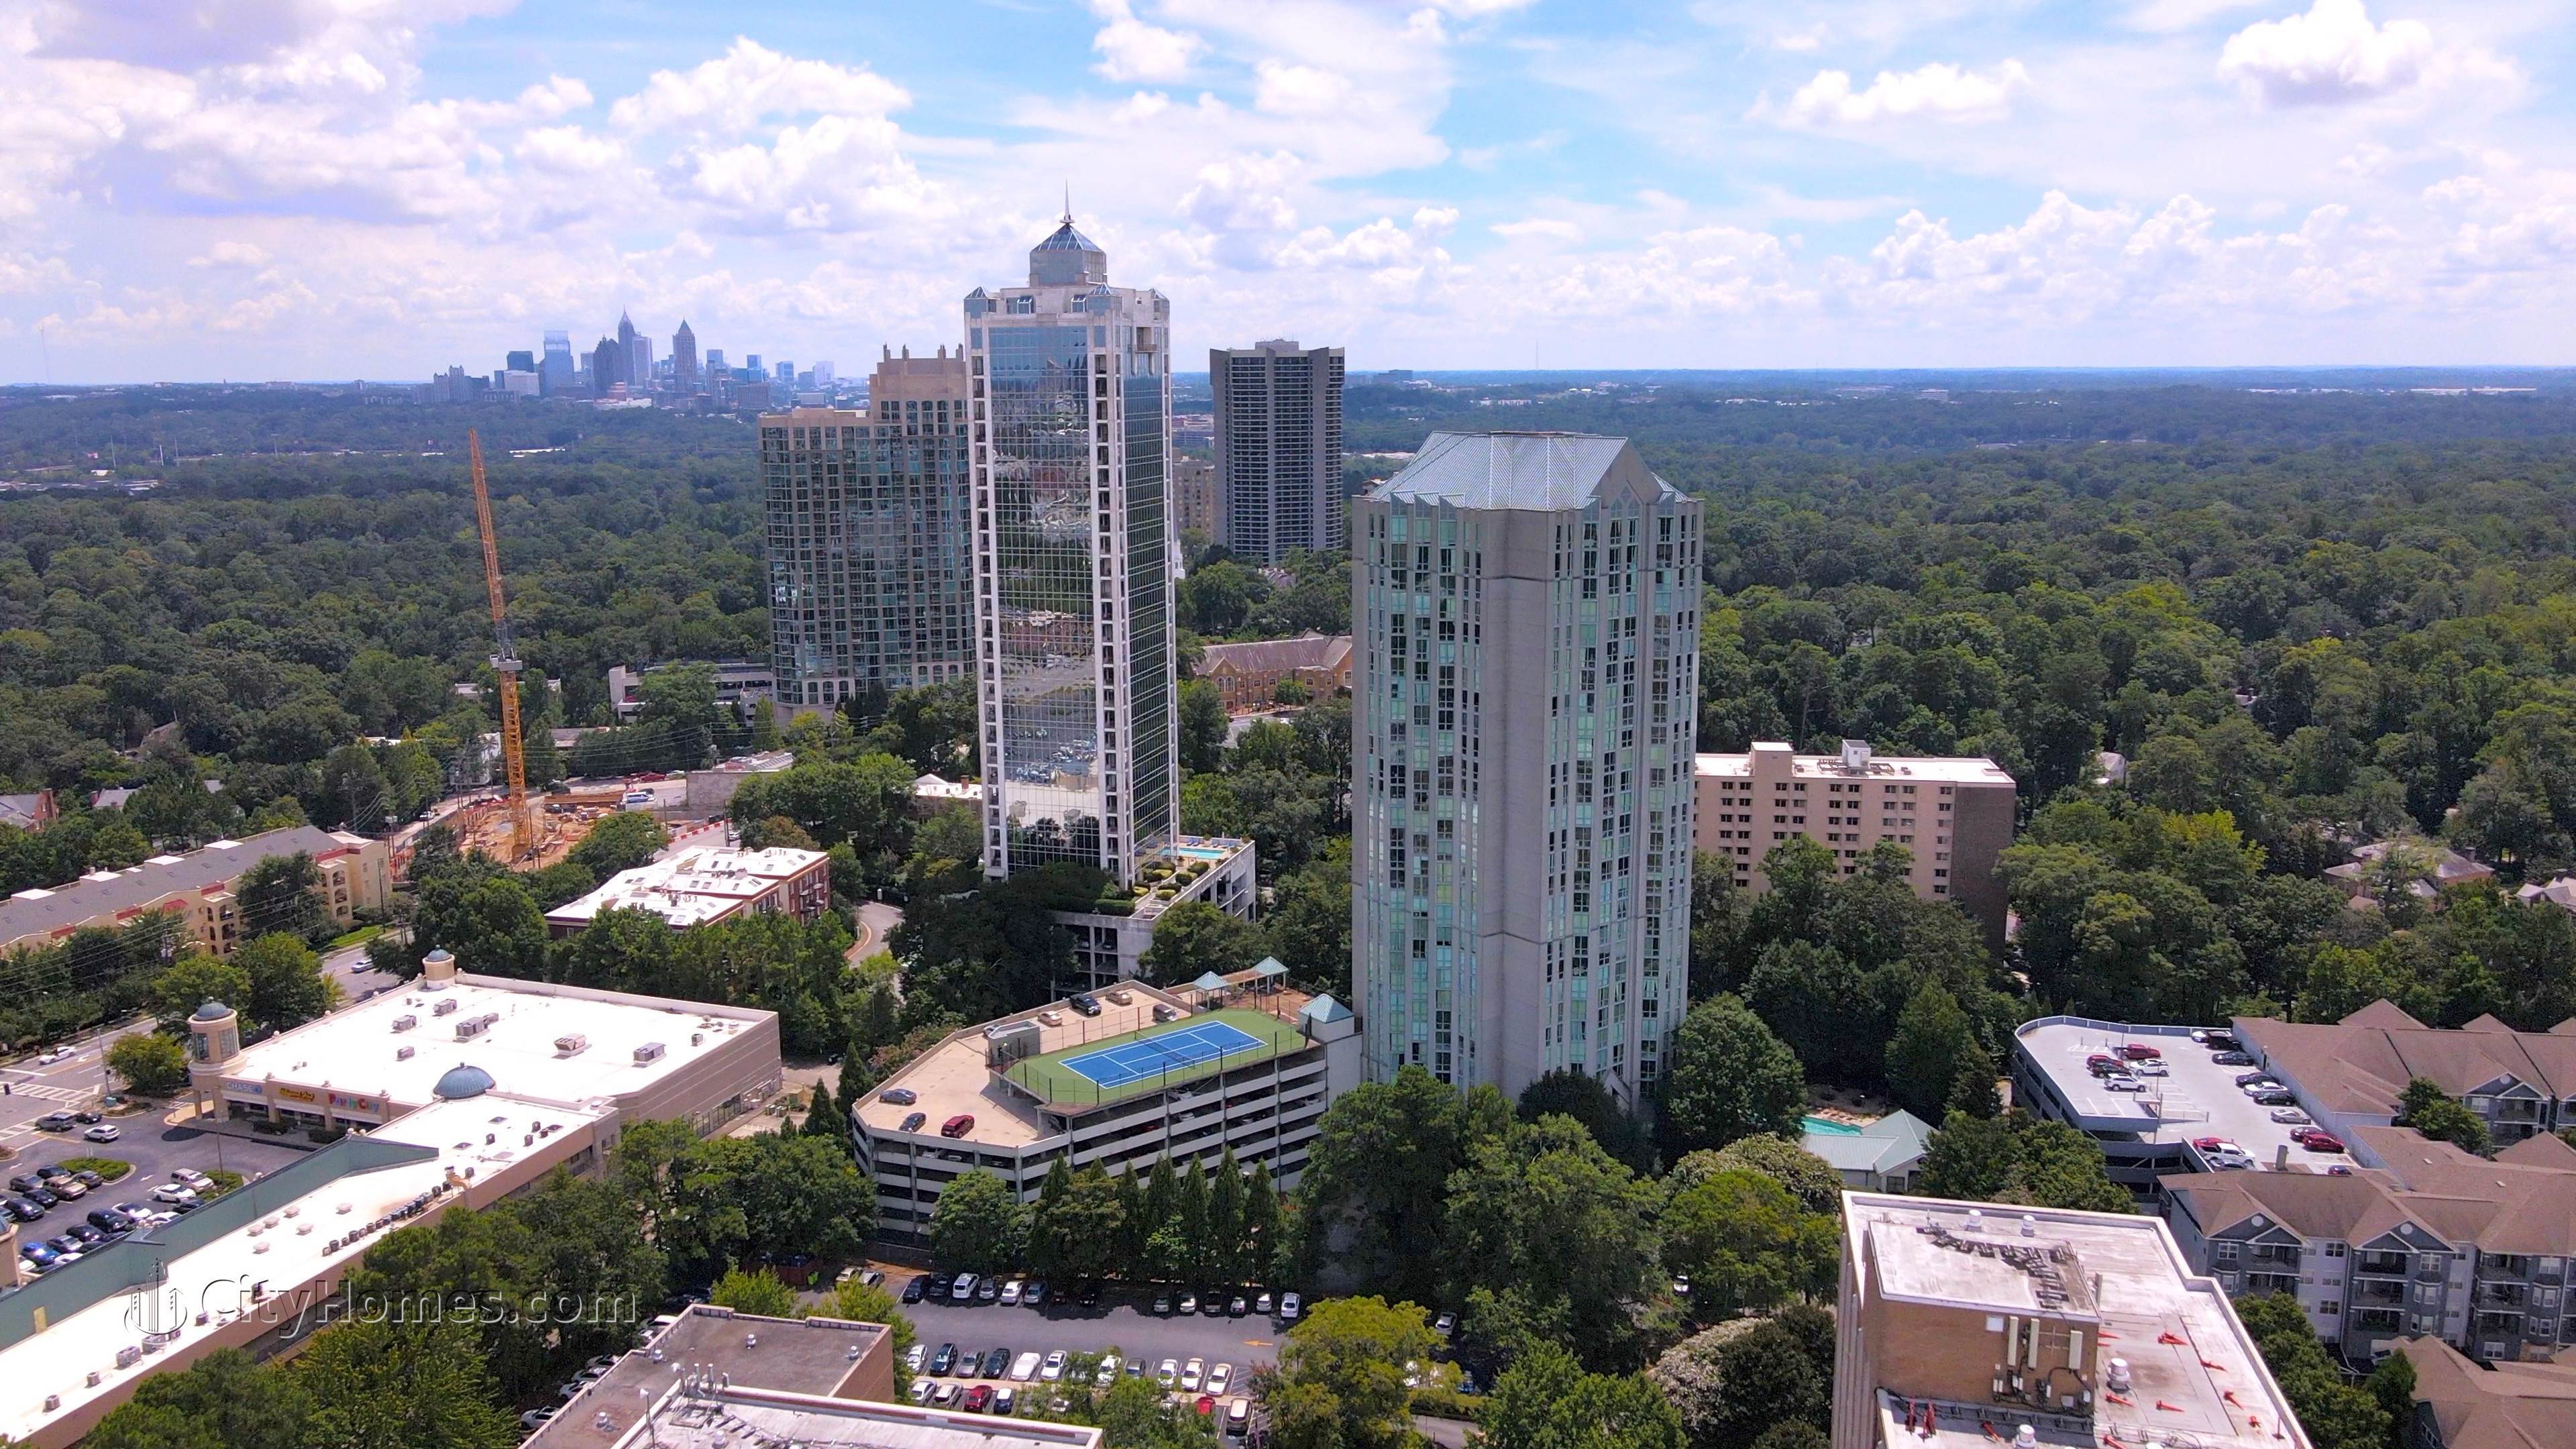 3. The Concorde building at 2870 Pharr Court S NW, Peachtree Heights West, Atlanta, GA 30305